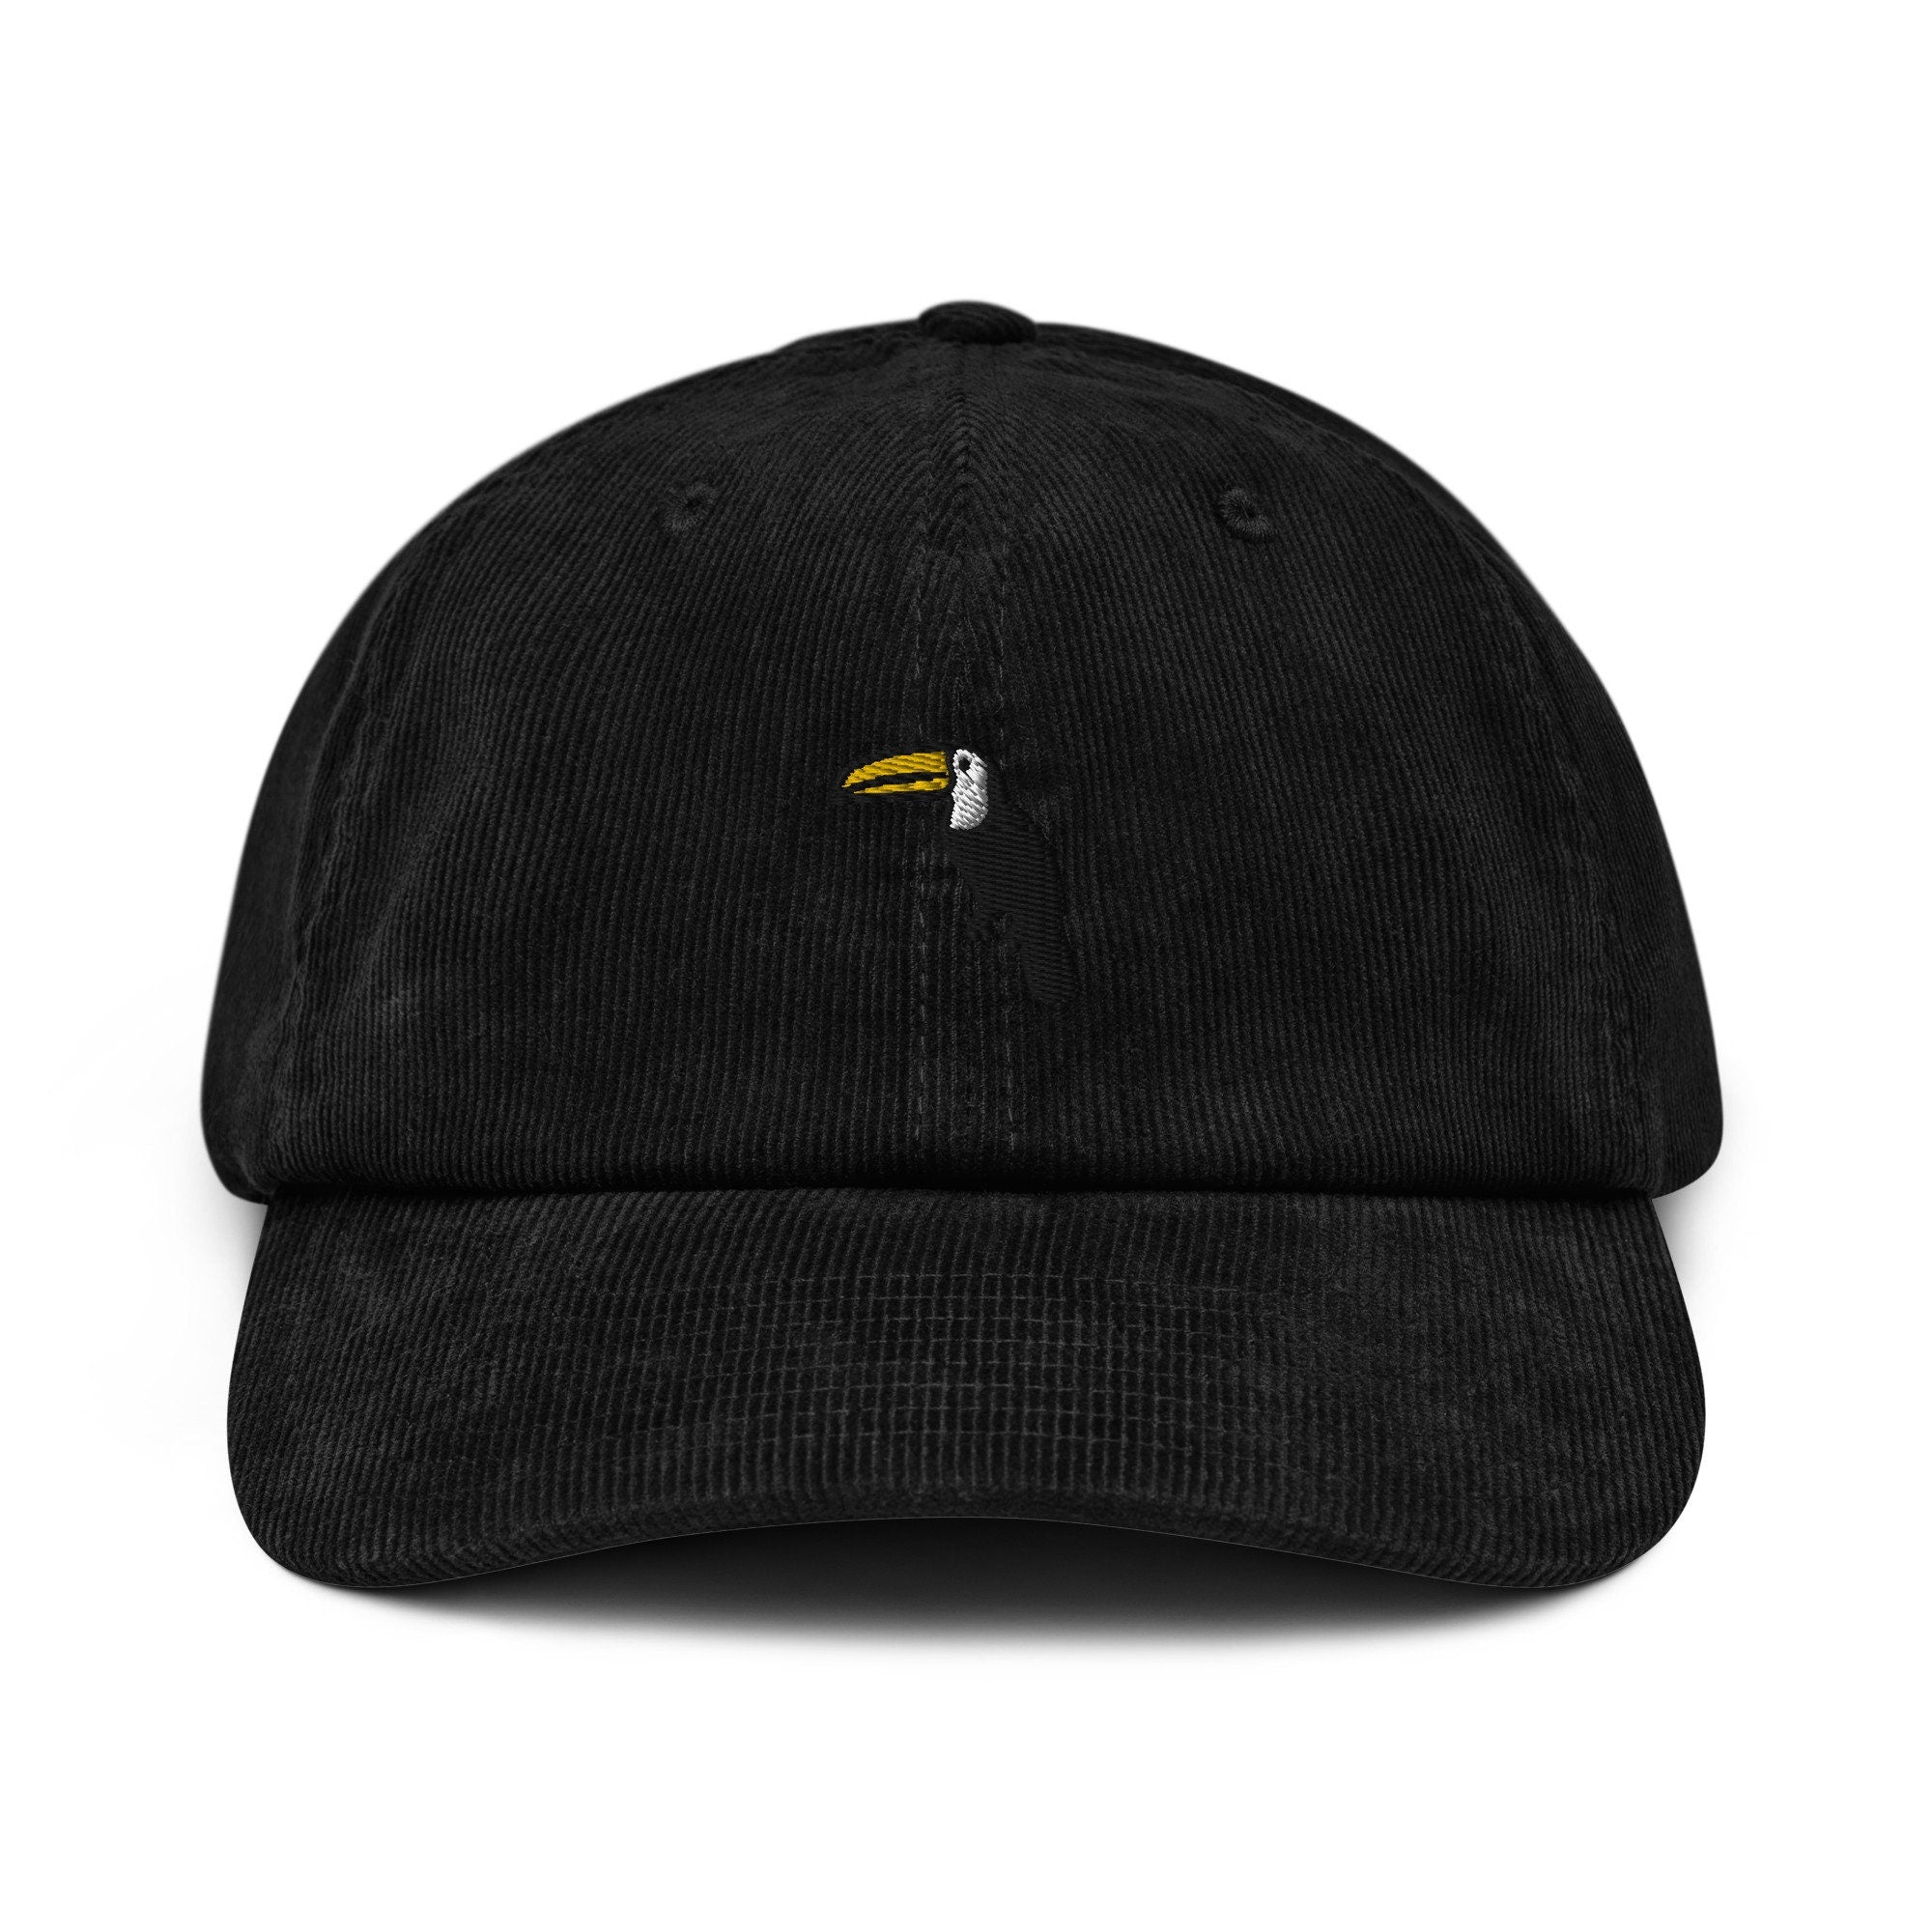 Toucan Corduroy Hat, Handmade Embroidered Corduroy Dad Cap - Multiple Colors